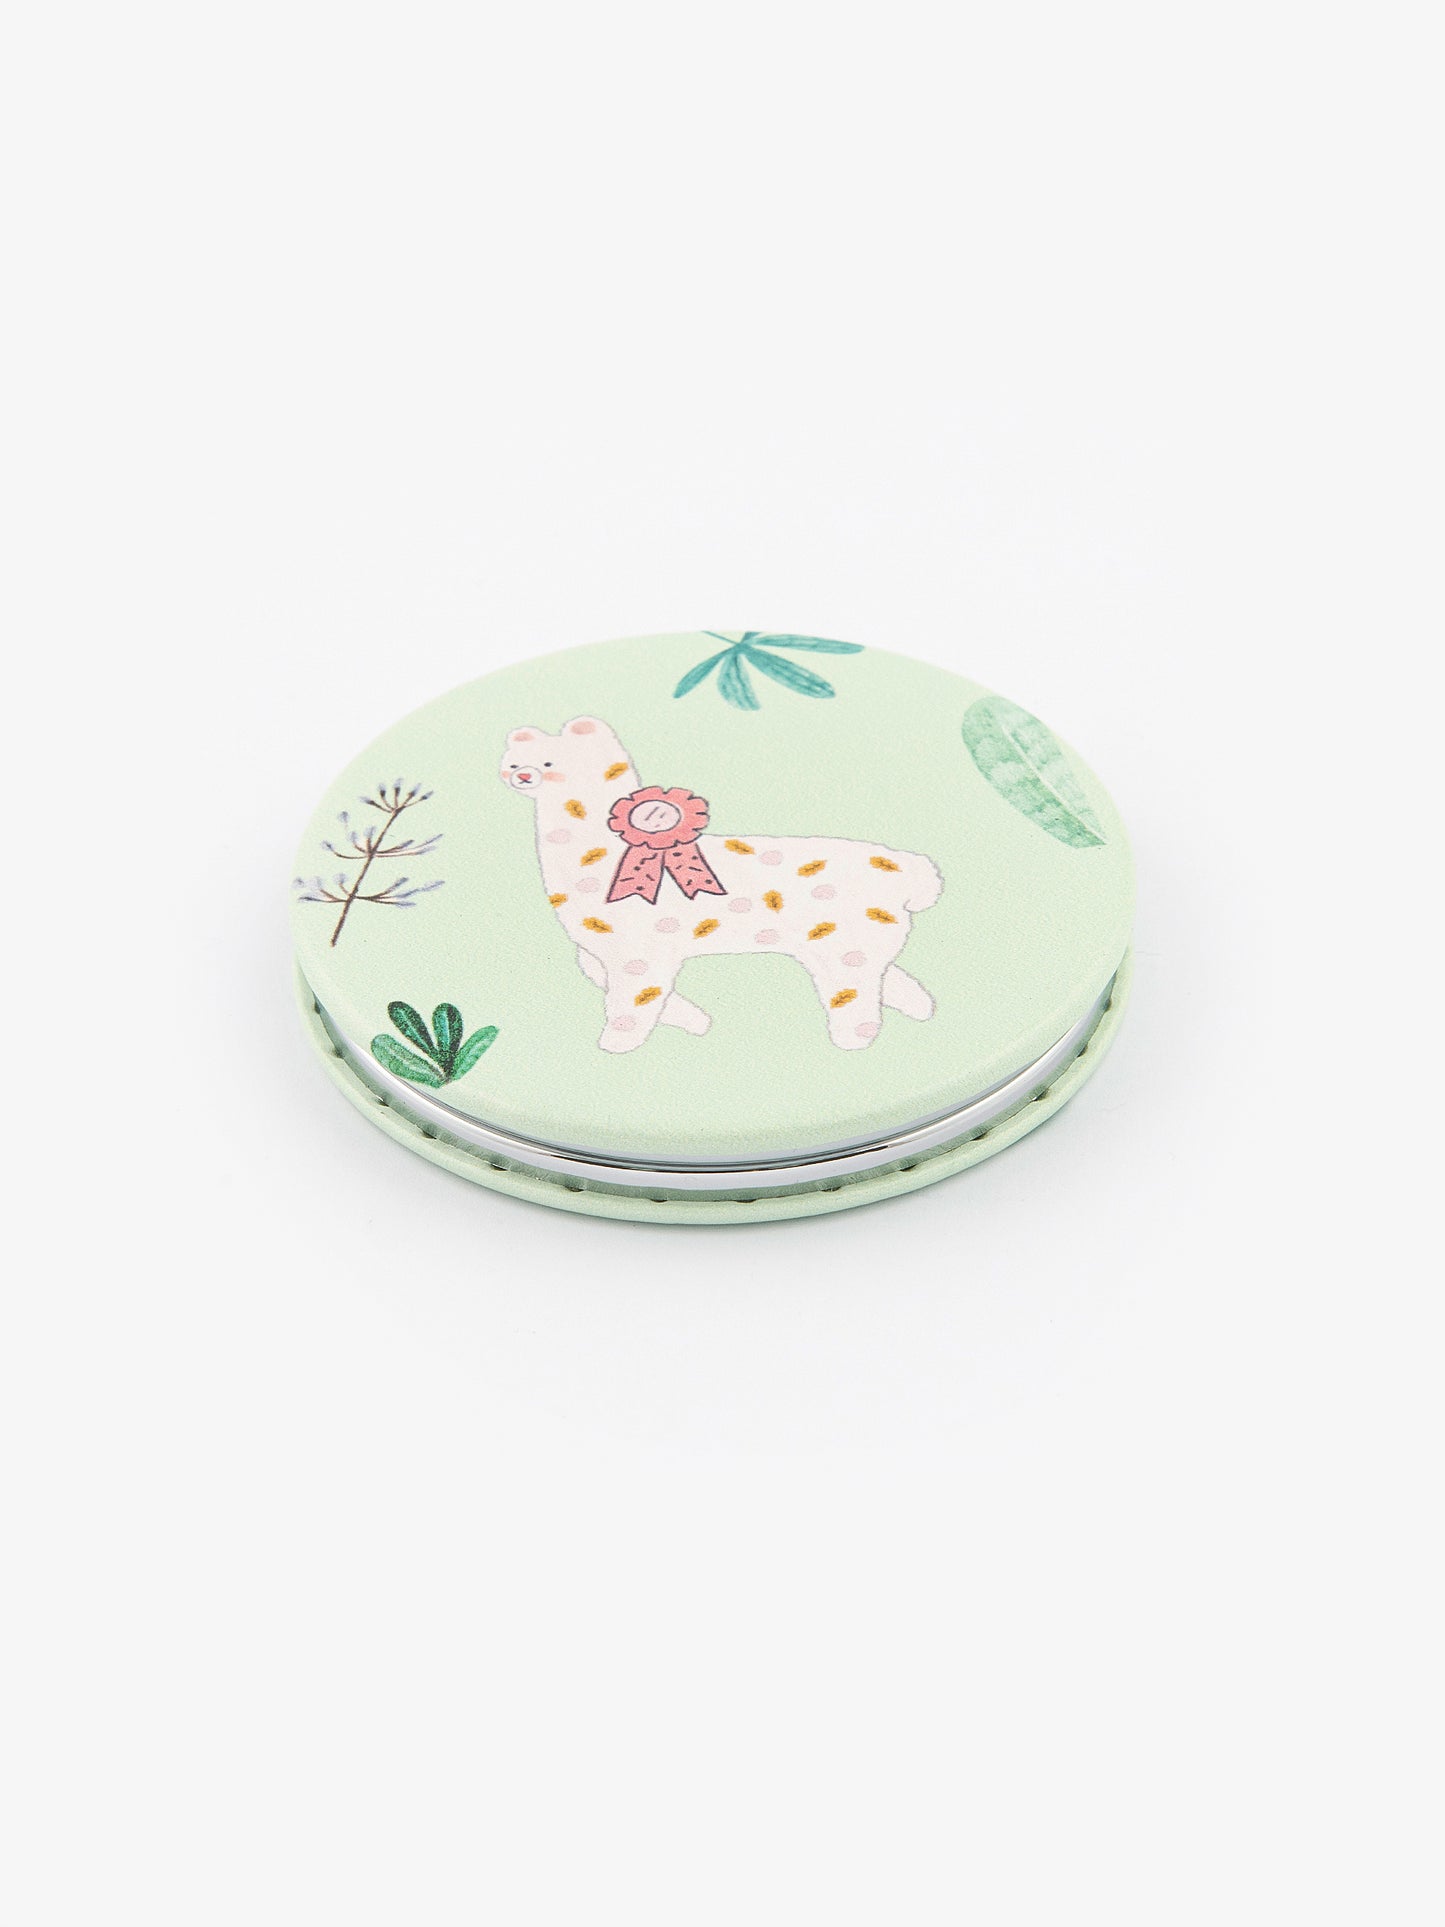 Animated Compact Mirror